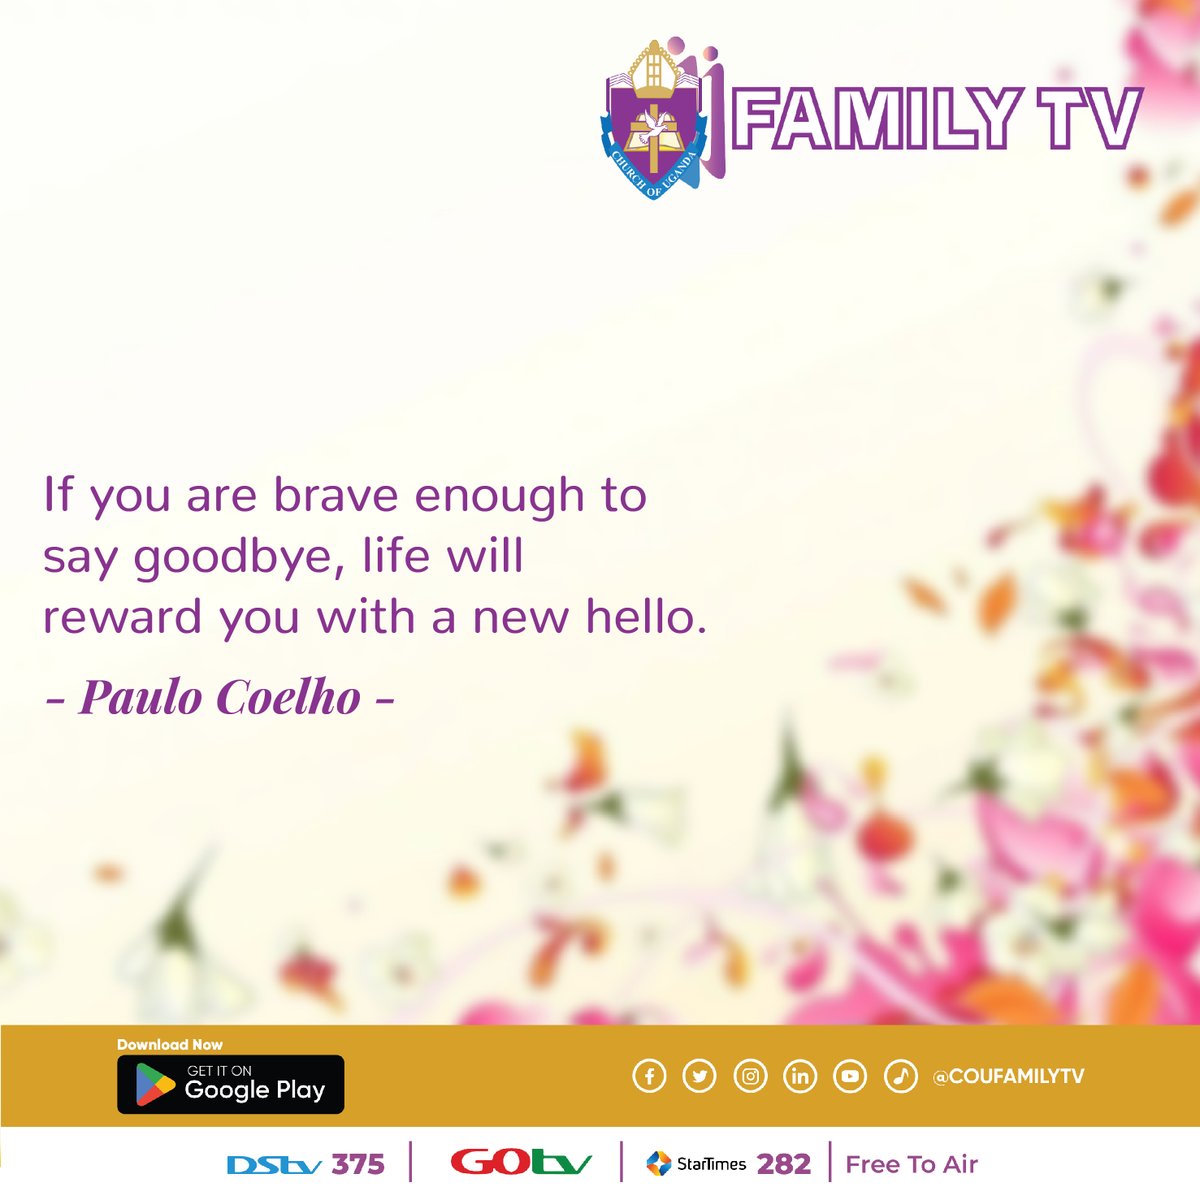 If you are brave enough to say goodbye, life will reward you with a new hello. – Paulo Coelho
#QuoteoftheDay #enrichinglives